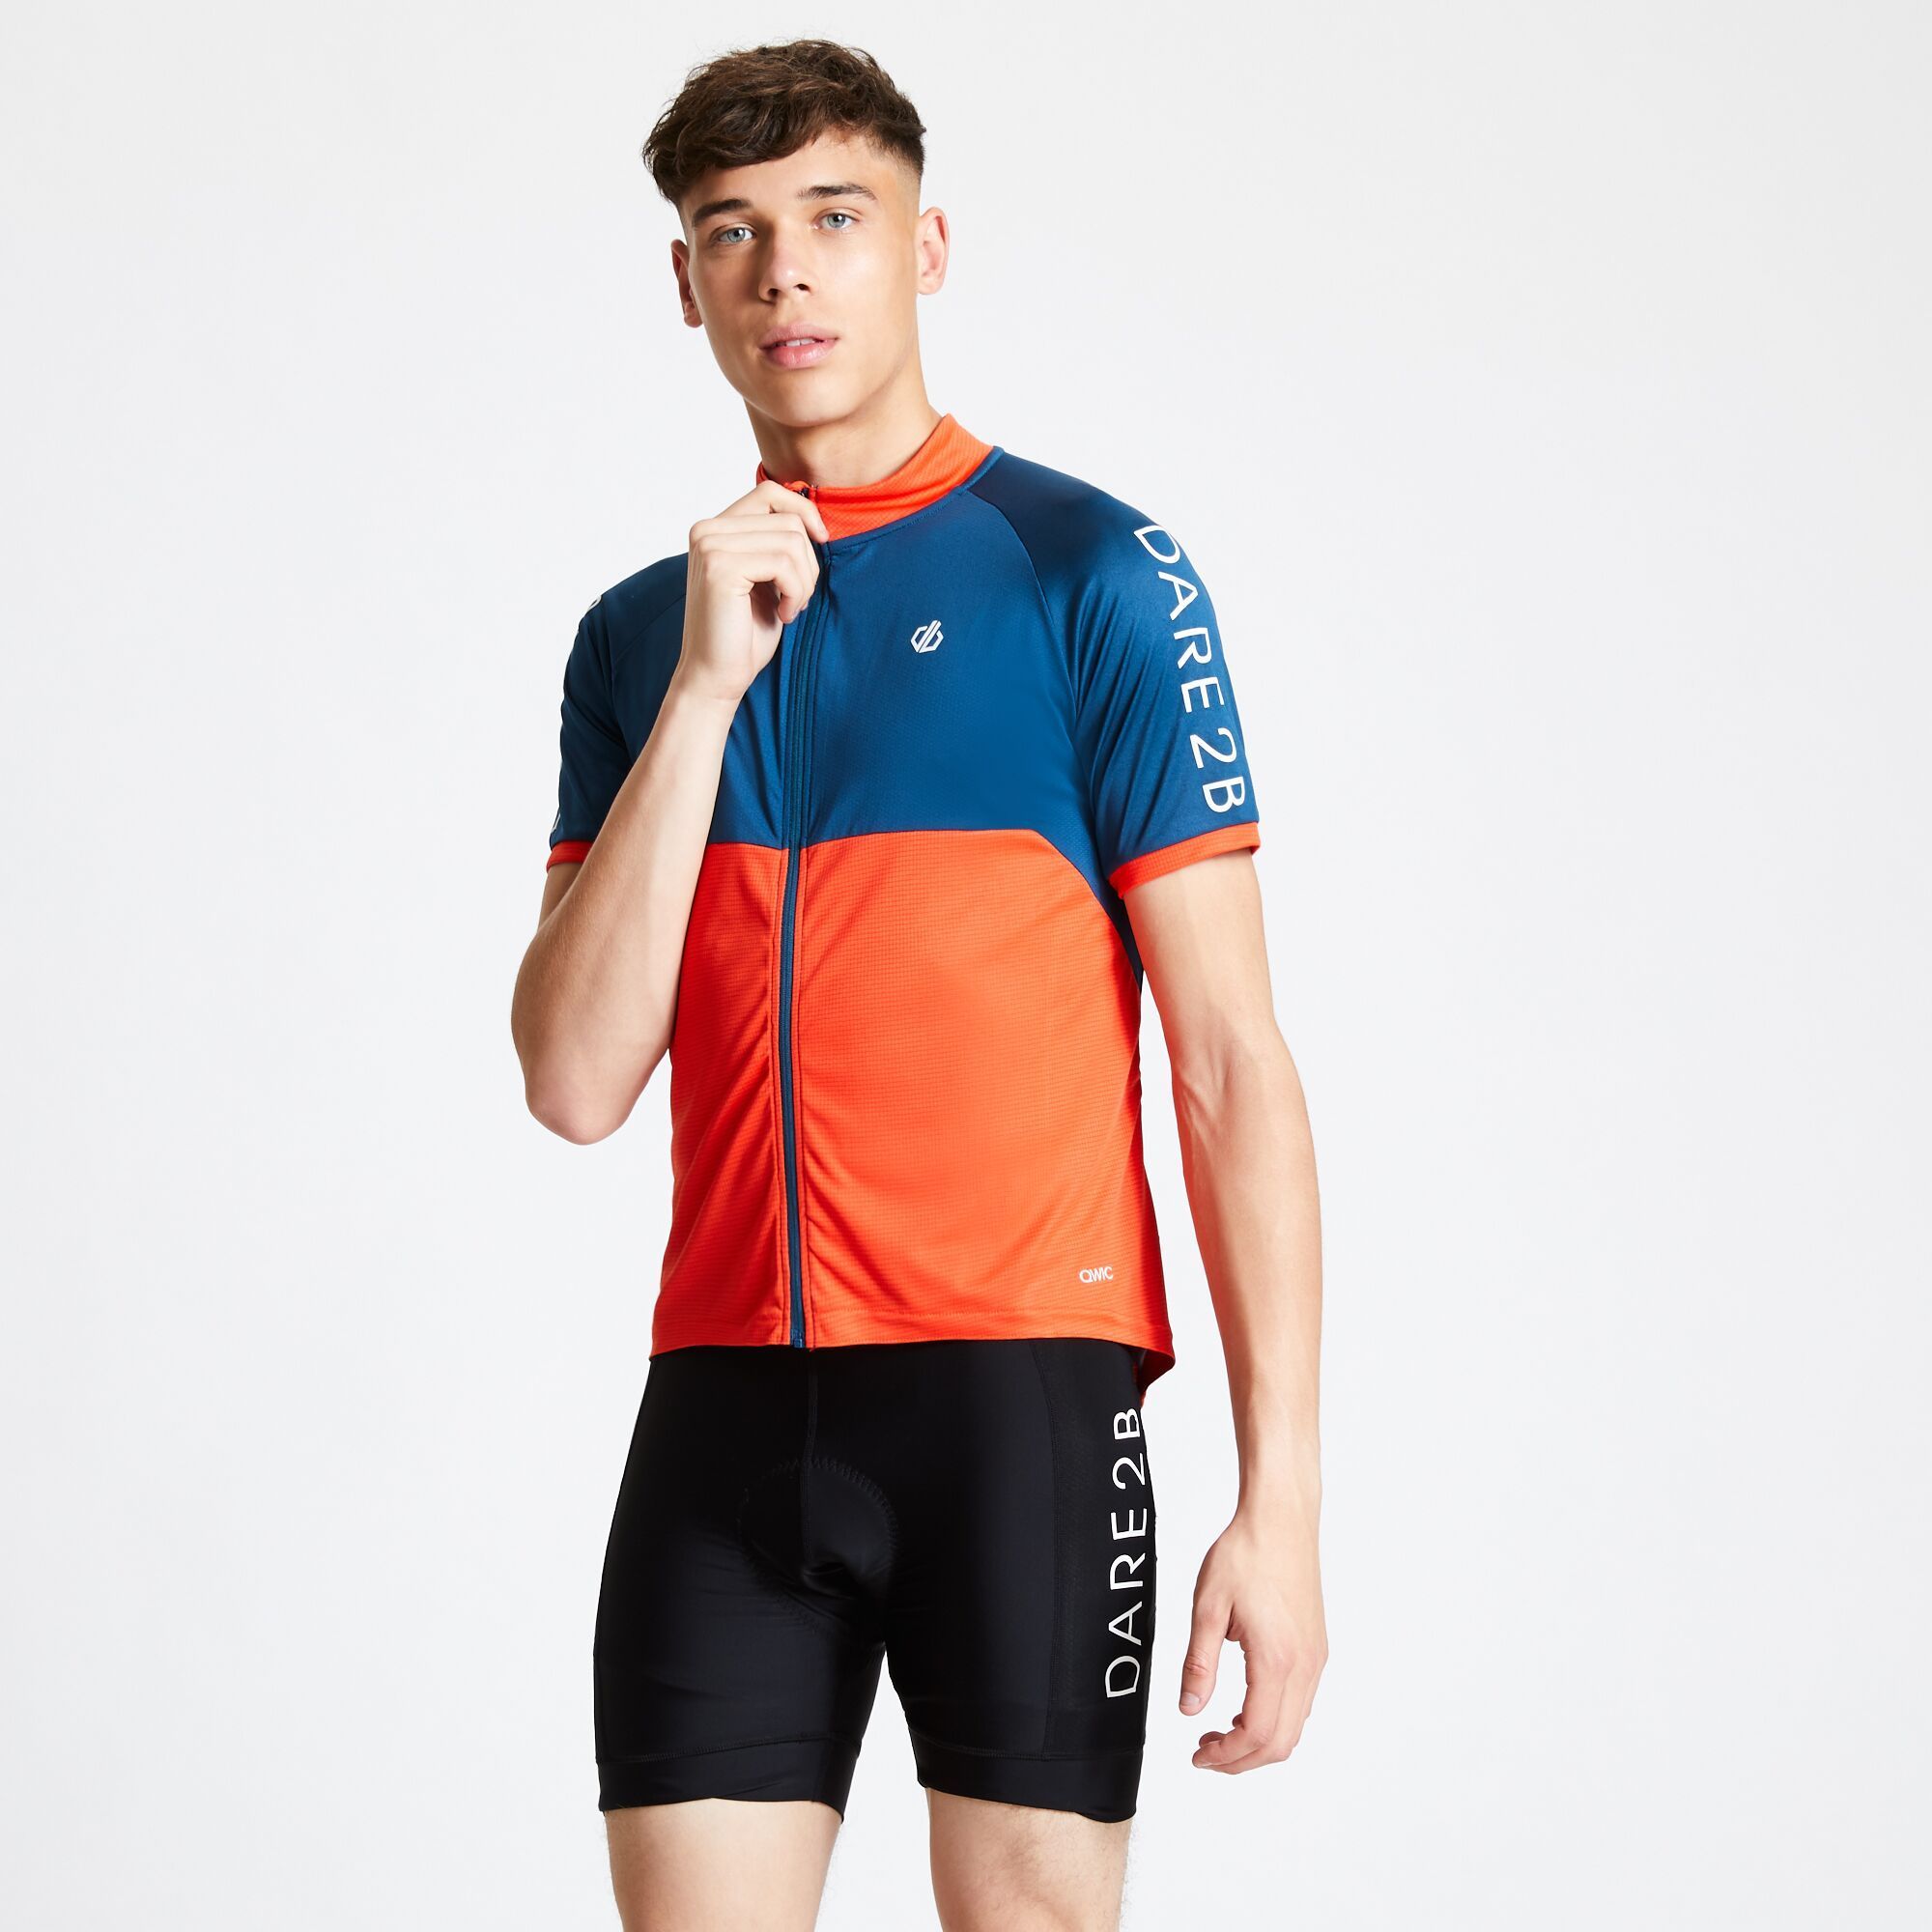 Material: 100% Polyester (Q-Wic Plus lightweight fabric). Soft and light-to-wear, stretch fit short-sleeved cycle jersey. Full-length centre front venting zip with autolock slider and inner grip guard. Long back with scooped elasticated hem. 3 compartment pockets at rear with zipped security pocket.